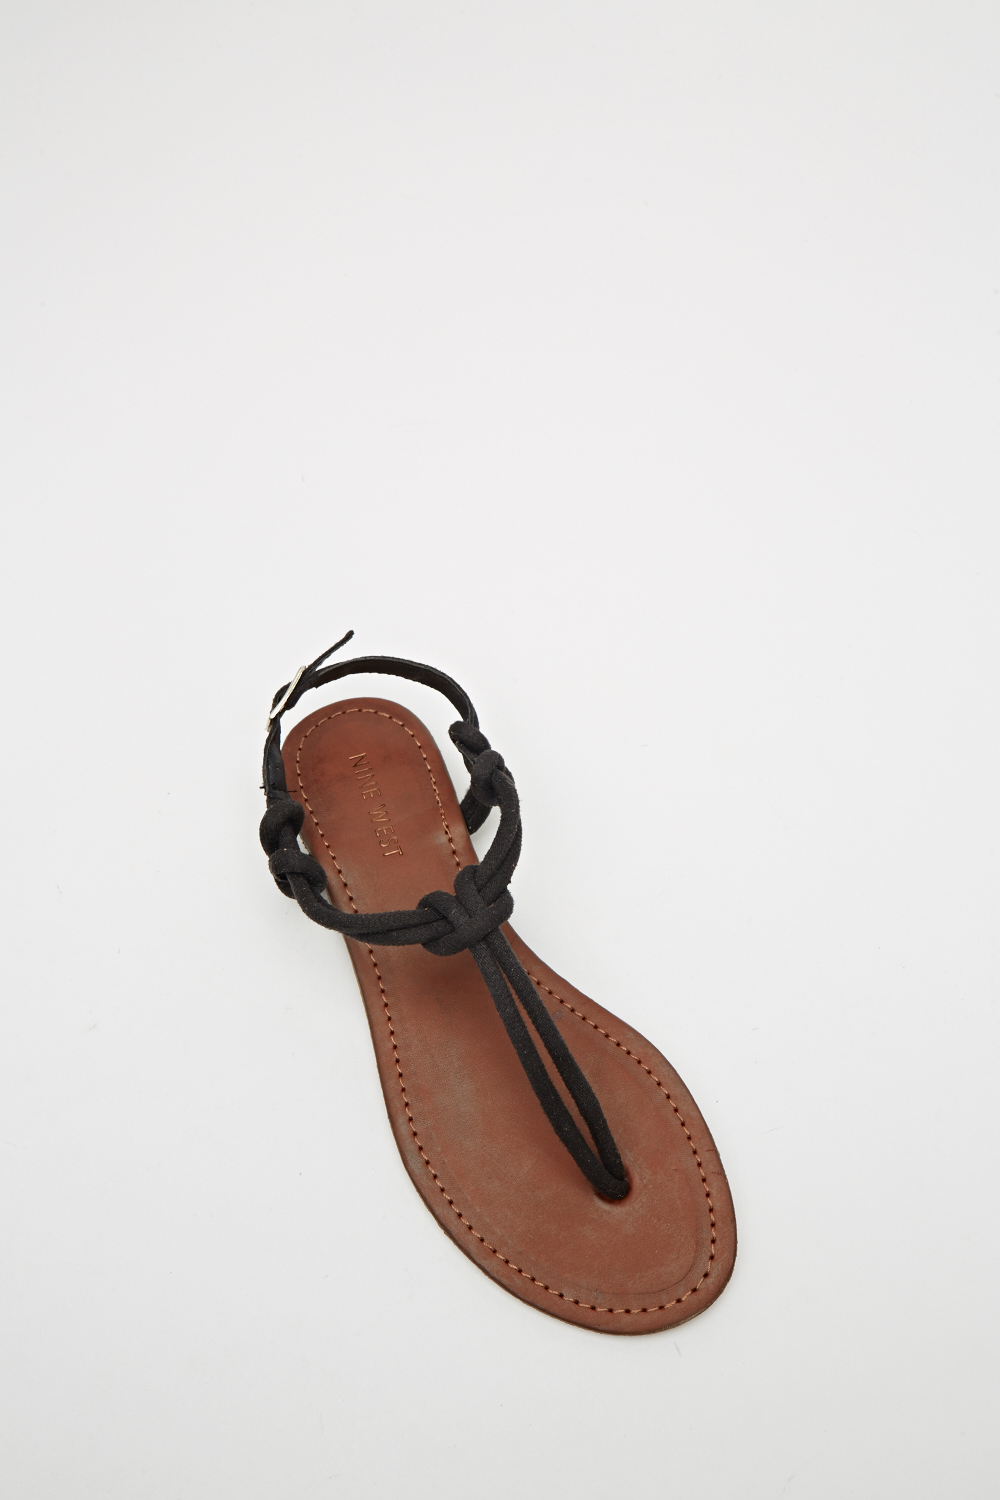 Knot Pattern Sandals - Just $7